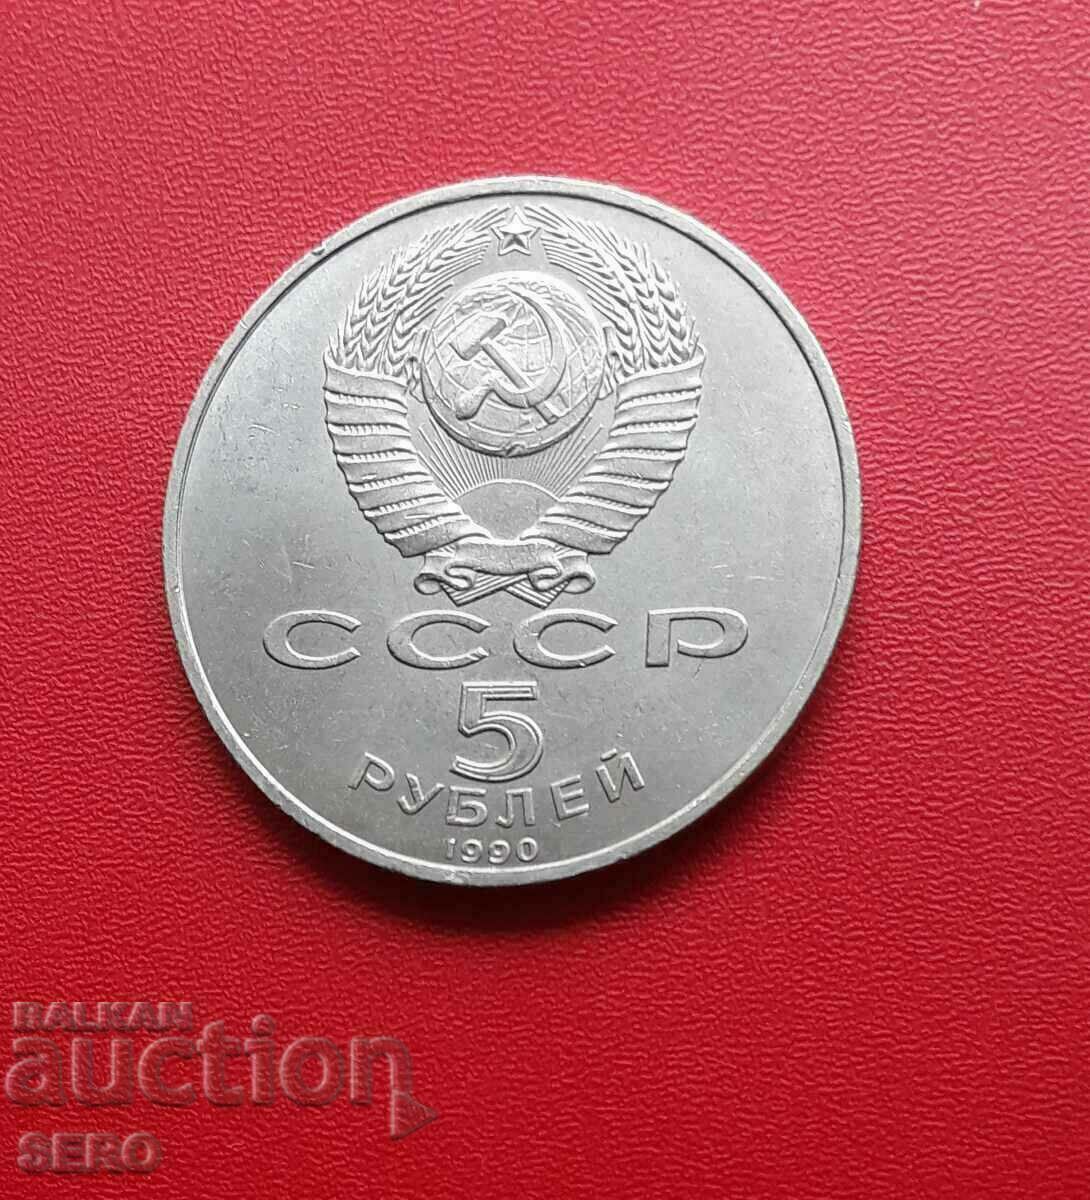 Russia-USSR-5 rubles 1990-Assumption Council-Moscow